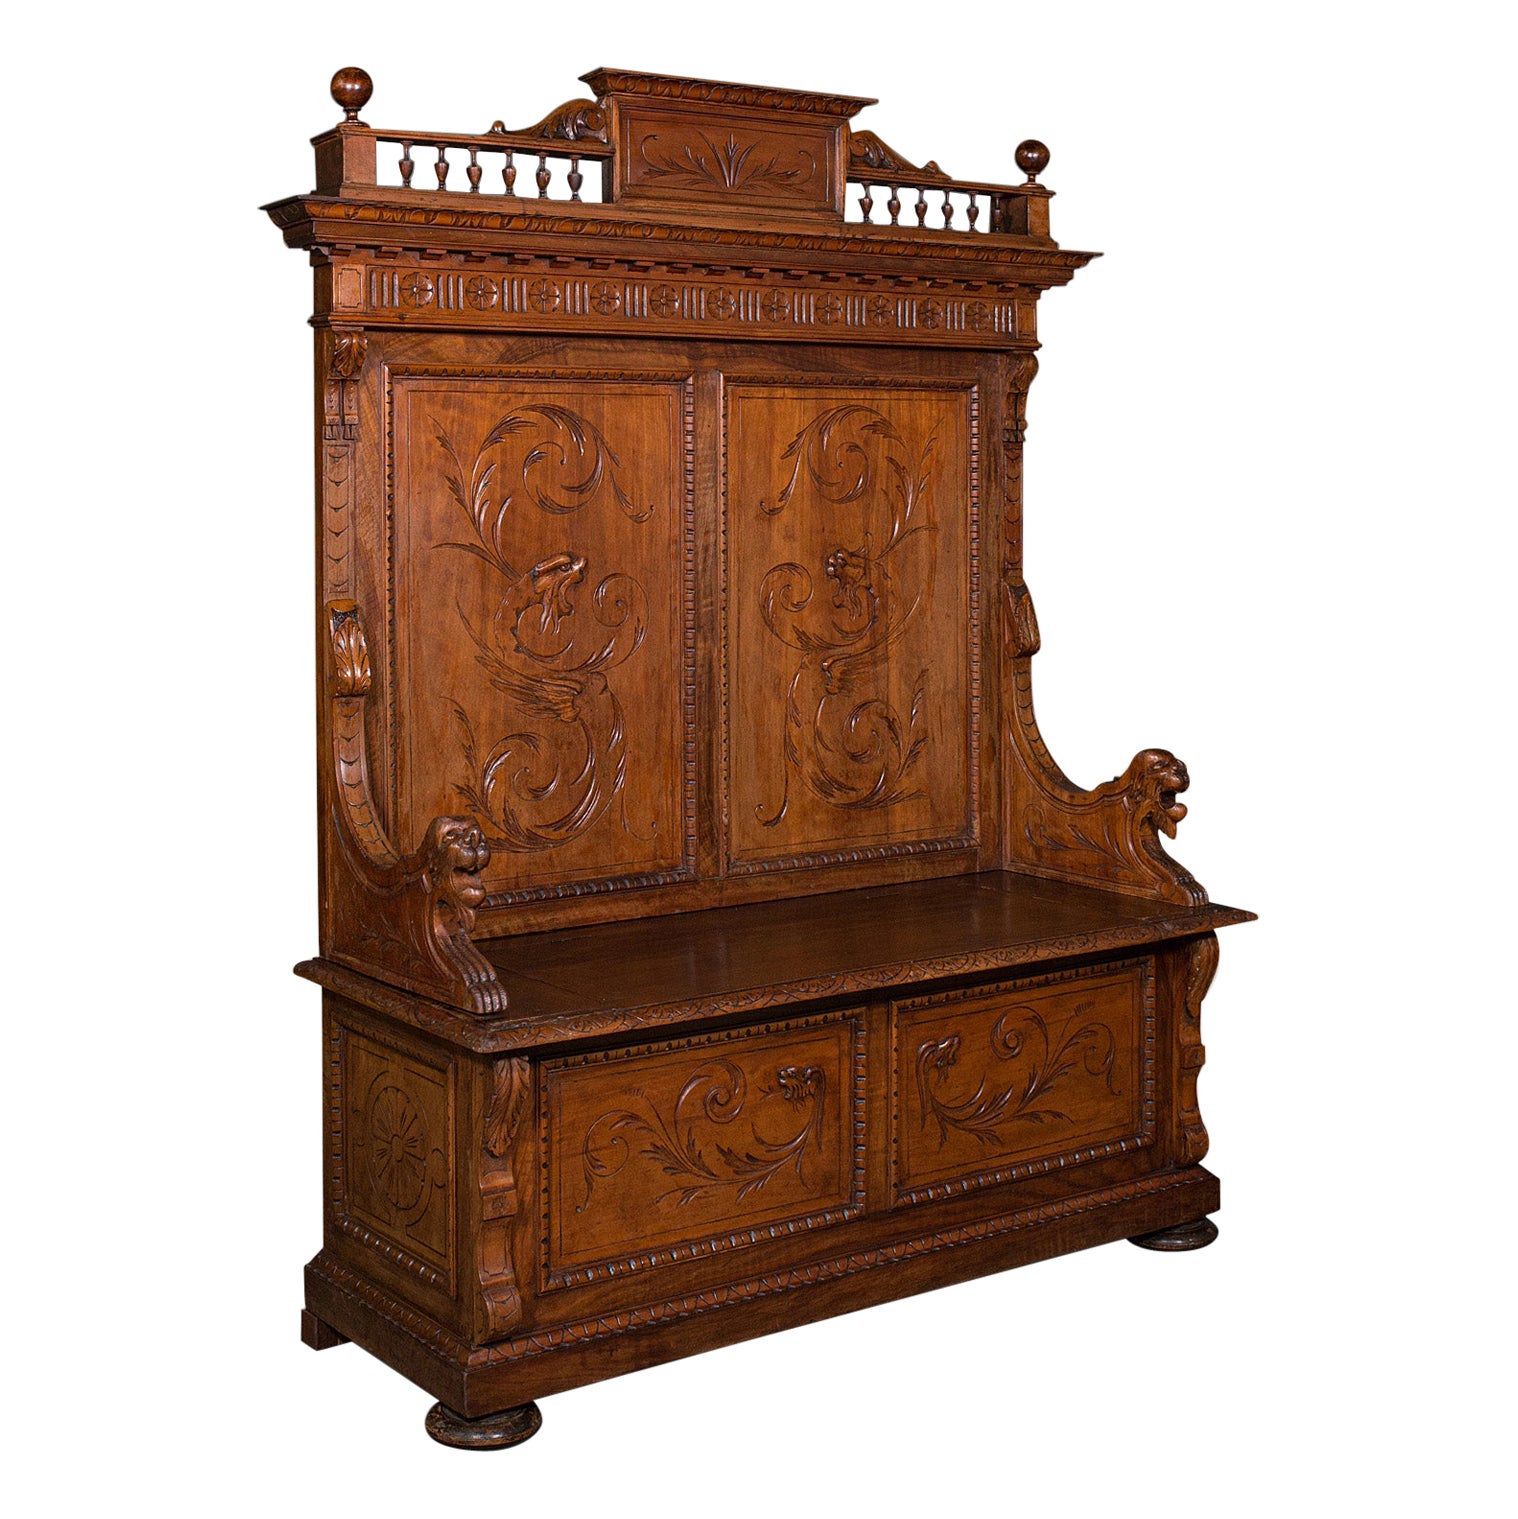 Large Antique Hall Settle, Italian, Pine, Walnut, Bench, Pew, Victorian, C.1850 For Sale